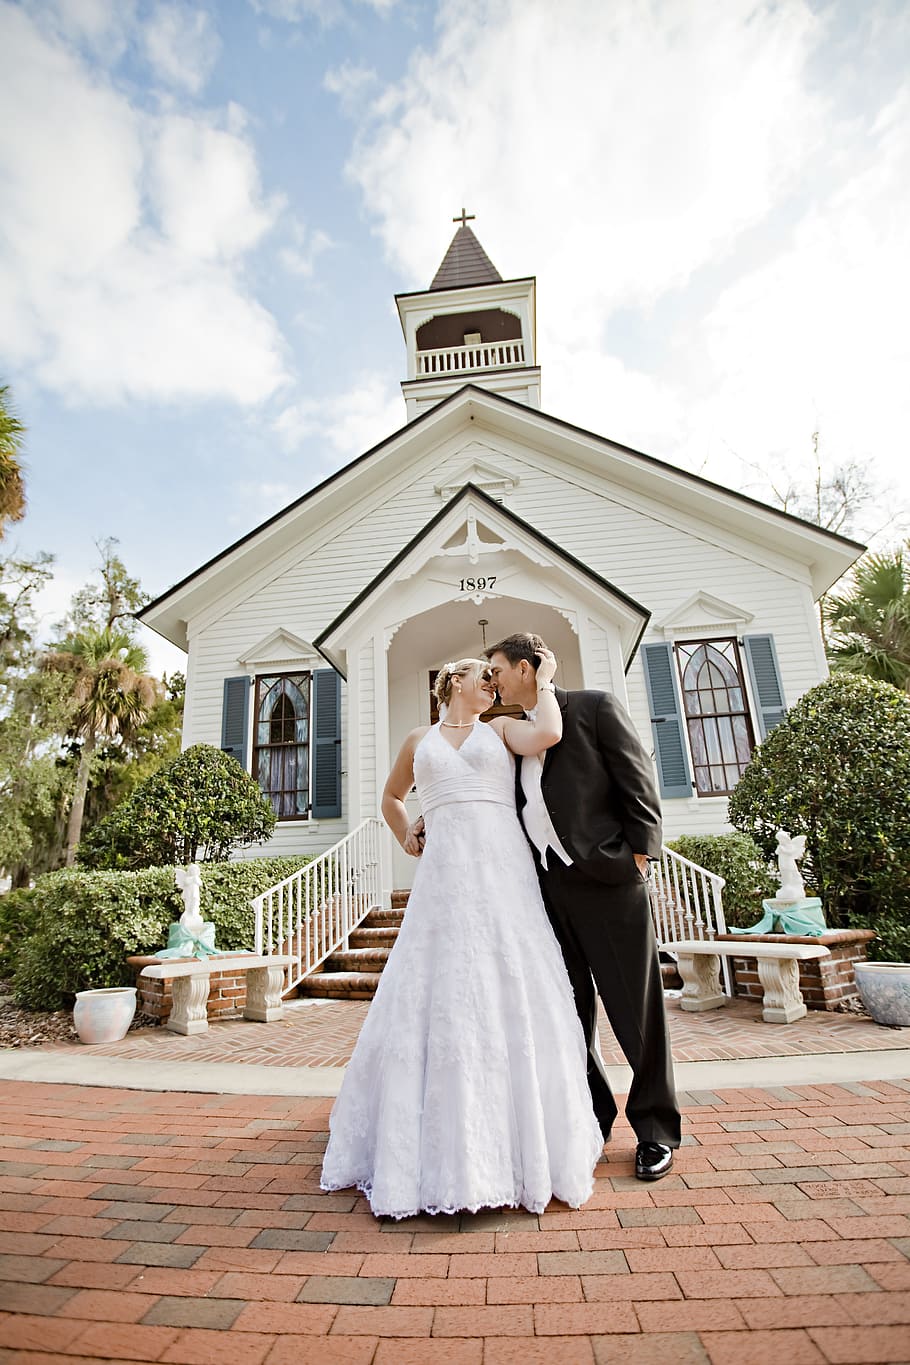 married, couple, front, white, brown, wooden, church, daytime, married couple, wooden church